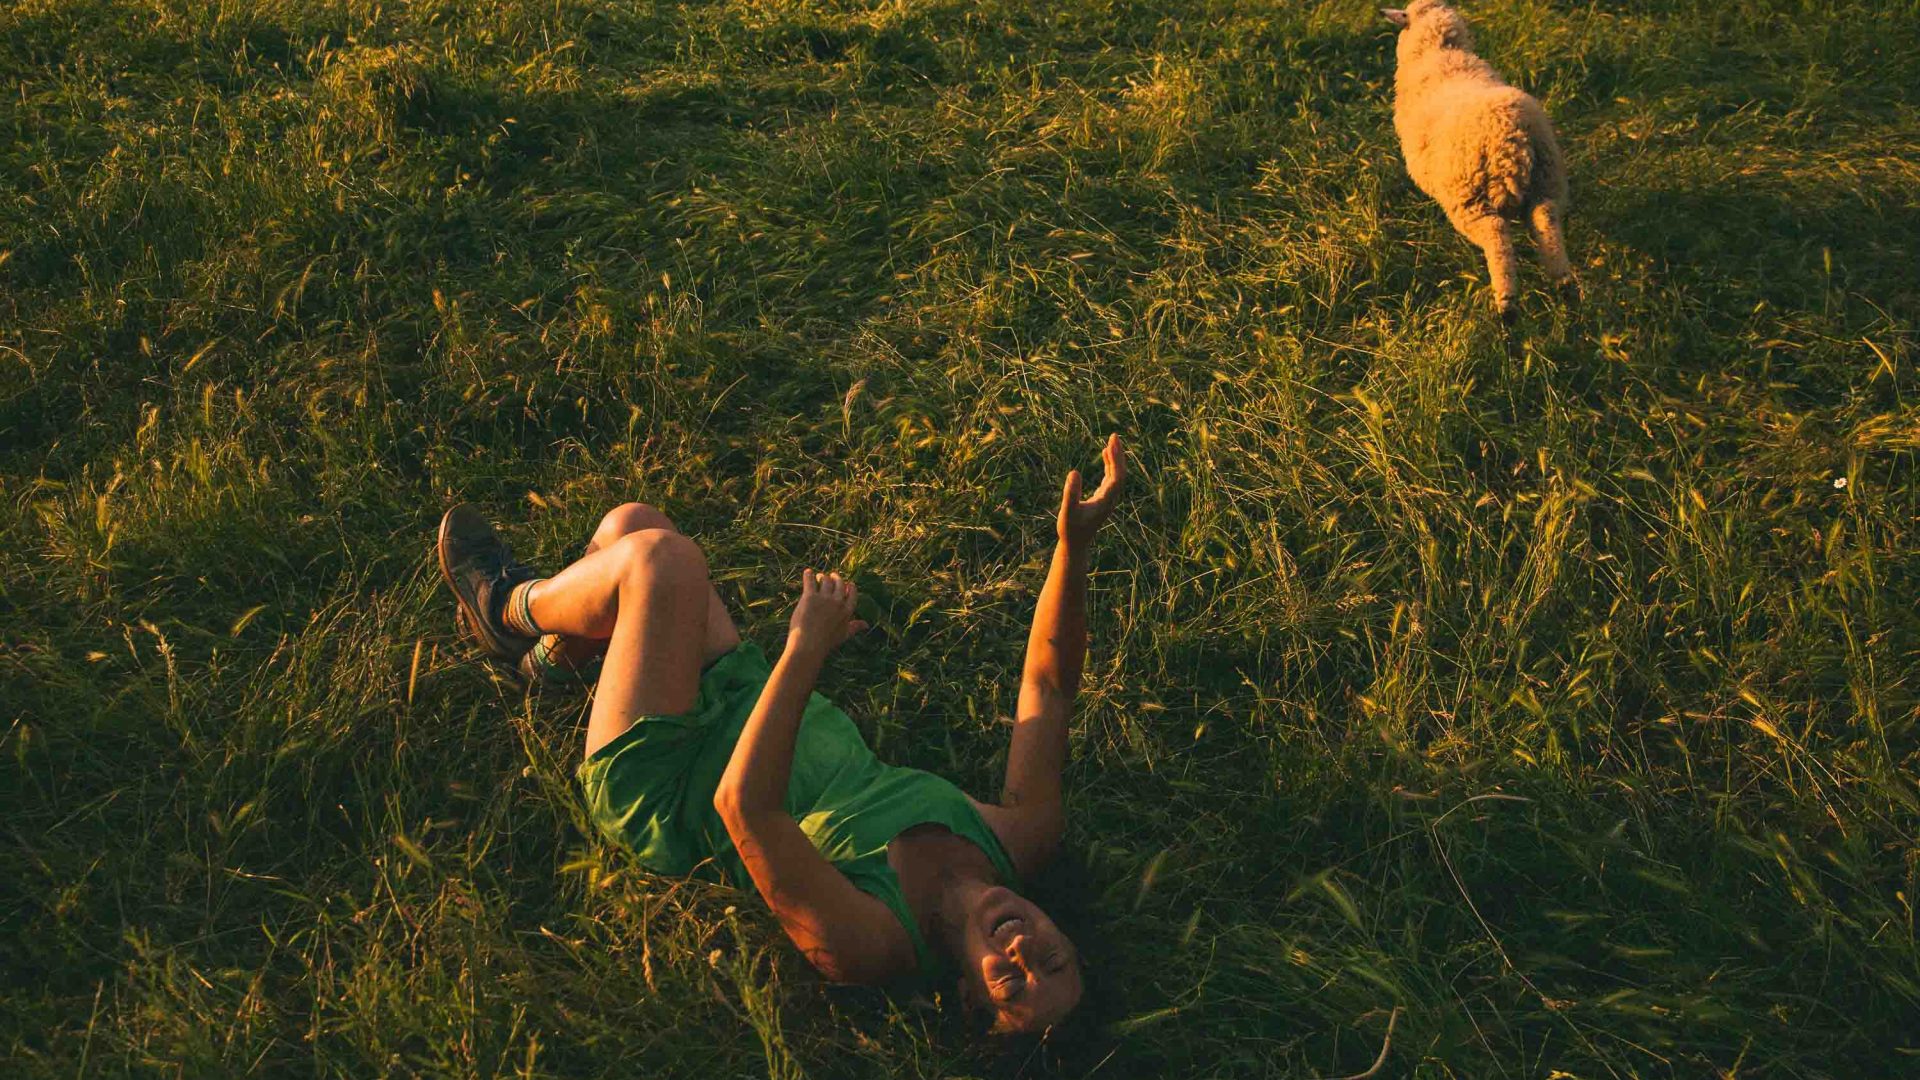 A woman lies laughing in the grass as a sheep goes past her.